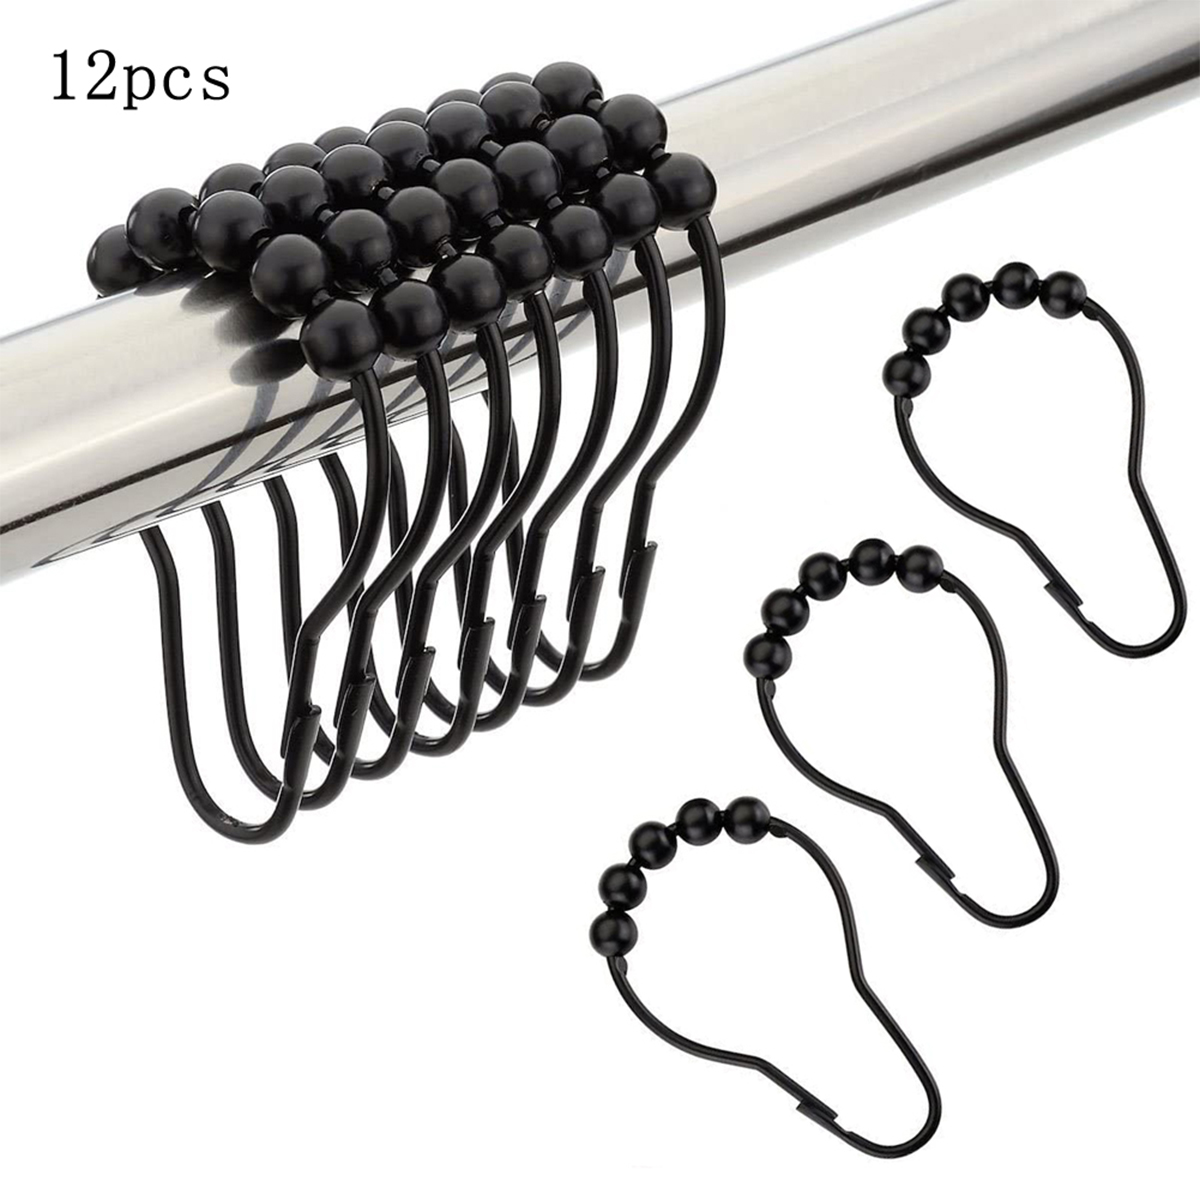 Rust Resistant Double Glide Metal Shower Curtain Hook Rings – Lovecup.com